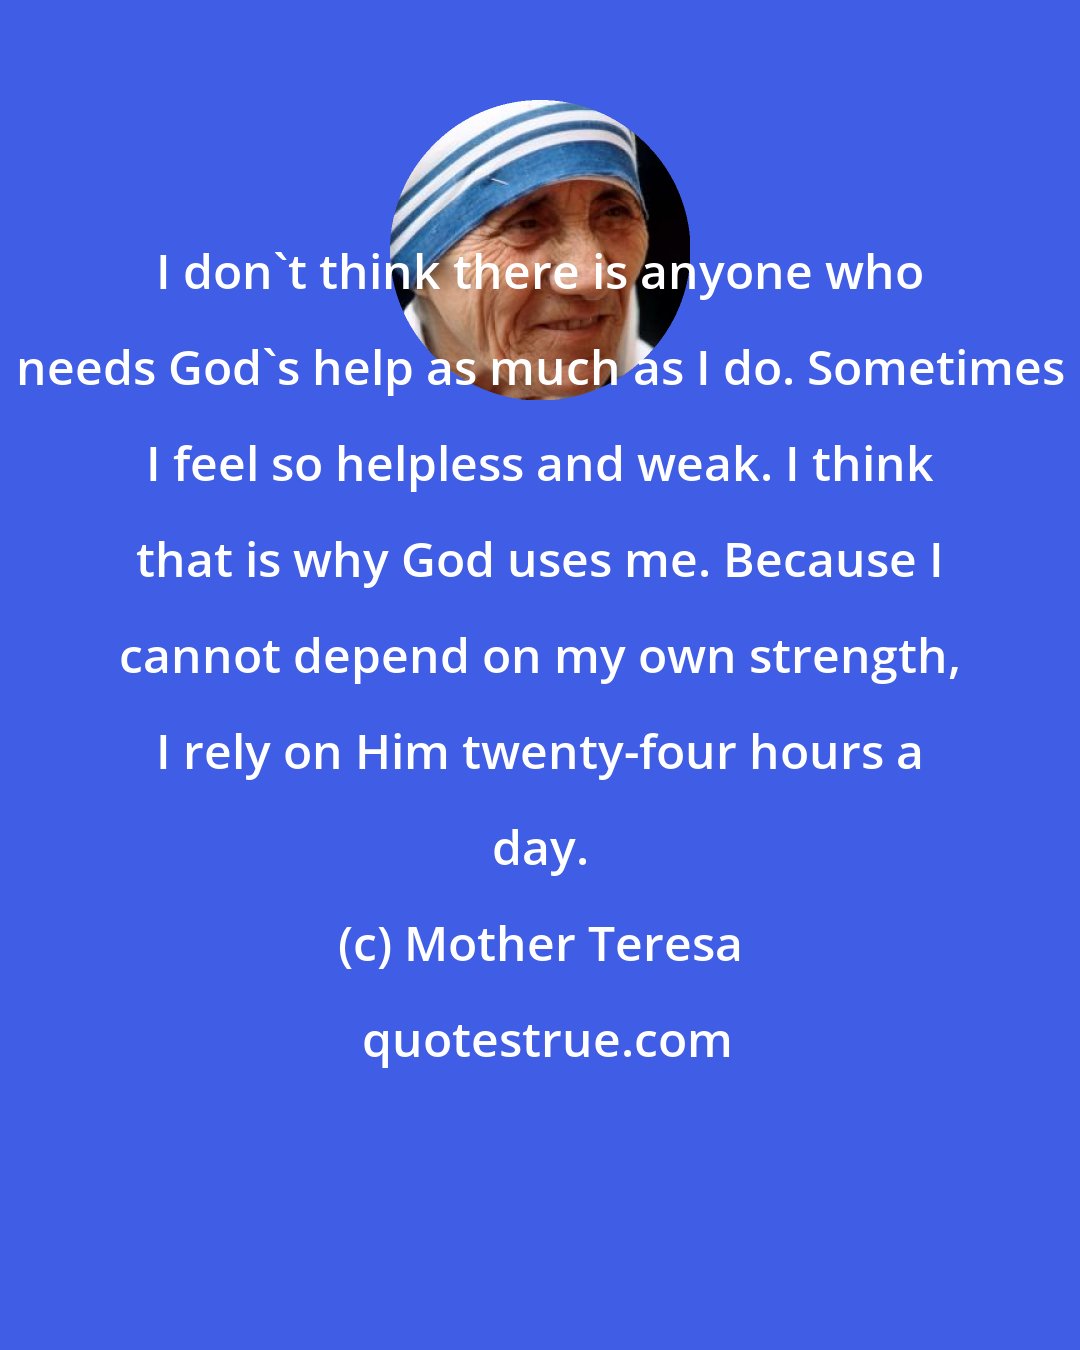 Mother Teresa: I don't think there is anyone who needs God's help as much as I do. Sometimes I feel so helpless and weak. I think that is why God uses me. Because I cannot depend on my own strength, I rely on Him twenty-four hours a day.